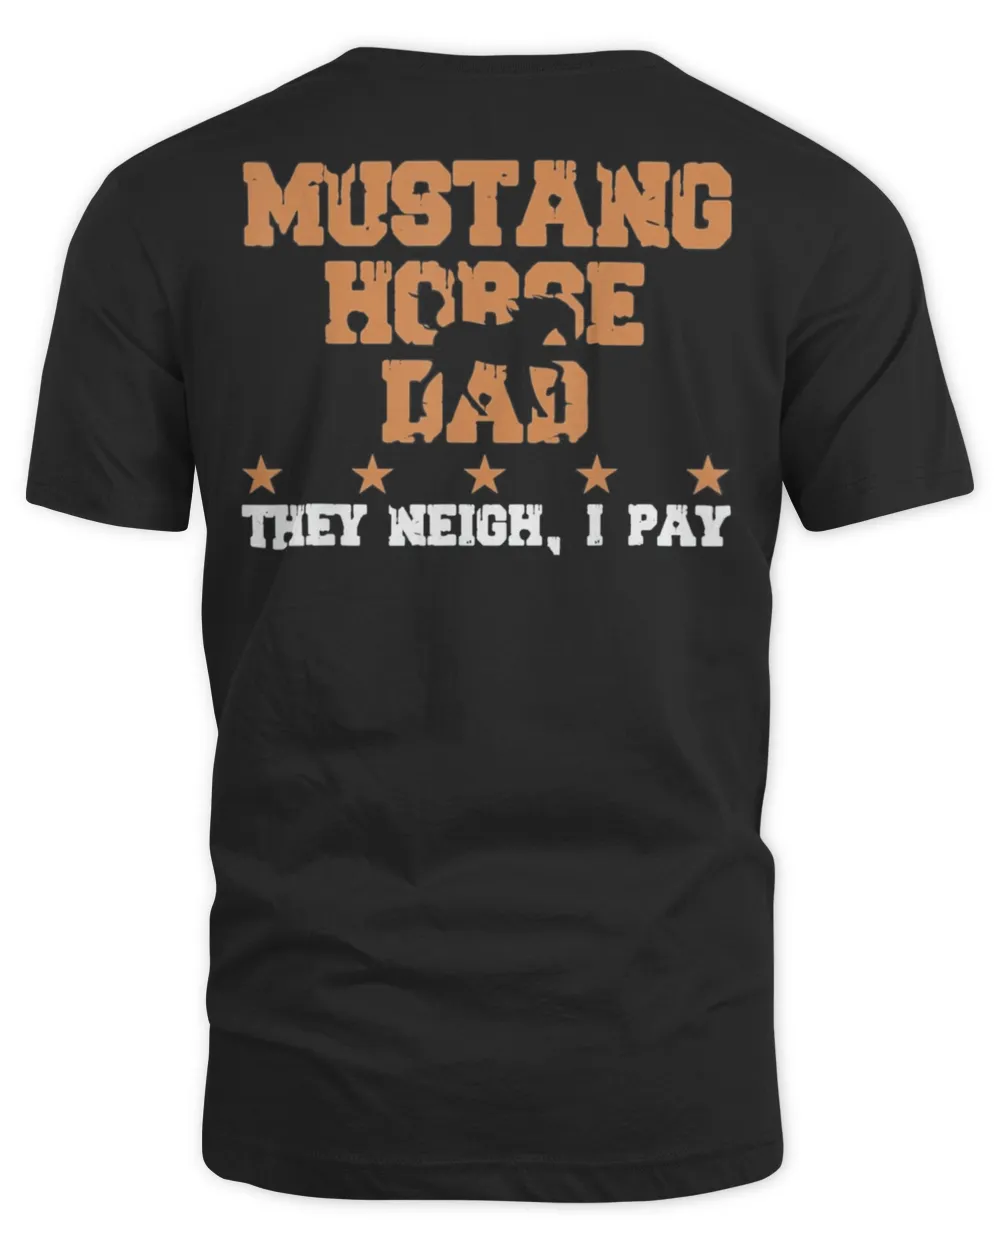 Horse Dad They Neigh I Pay Mustang Horse Shirt